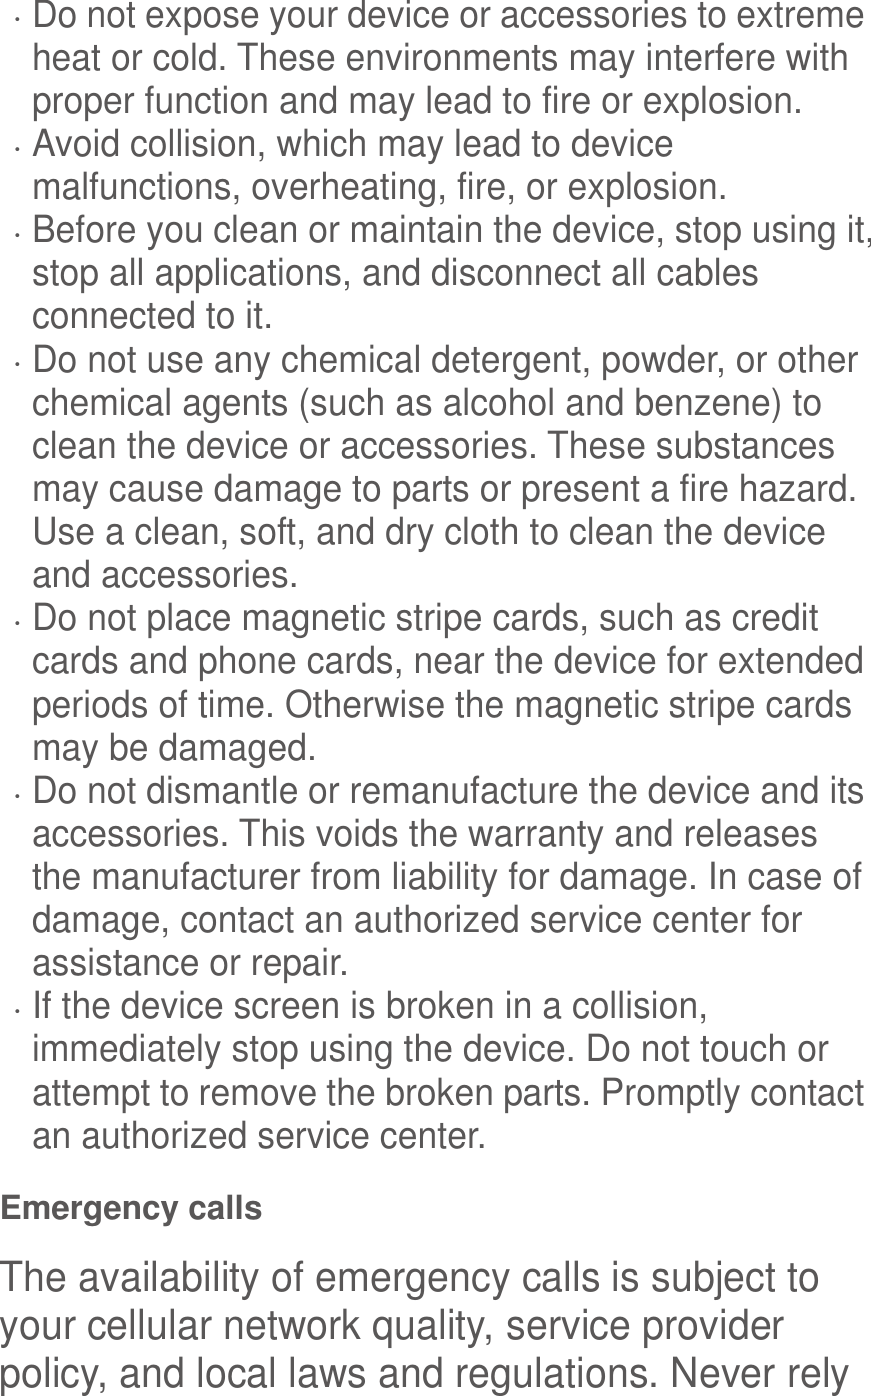   Do not expose your device or accessories to extreme heat or cold. These environments may interfere with proper function and may lead to fire or explosion.    Avoid collision, which may lead to device malfunctions, overheating, fire, or explosion.    Before you clean or maintain the device, stop using it, stop all applications, and disconnect all cables connected to it.  Do not use any chemical detergent, powder, or other chemical agents (such as alcohol and benzene) to clean the device or accessories. These substances may cause damage to parts or present a fire hazard. Use a clean, soft, and dry cloth to clean the device and accessories.  Do not place magnetic stripe cards, such as credit cards and phone cards, near the device for extended periods of time. Otherwise the magnetic stripe cards may be damaged.  Do not dismantle or remanufacture the device and its accessories. This voids the warranty and releases the manufacturer from liability for damage. In case of damage, contact an authorized service center for assistance or repair.  If the device screen is broken in a collision, immediately stop using the device. Do not touch or attempt to remove the broken parts. Promptly contact an authorized service center.   Emergency calls The availability of emergency calls is subject to your cellular network quality, service provider policy, and local laws and regulations. Never rely 